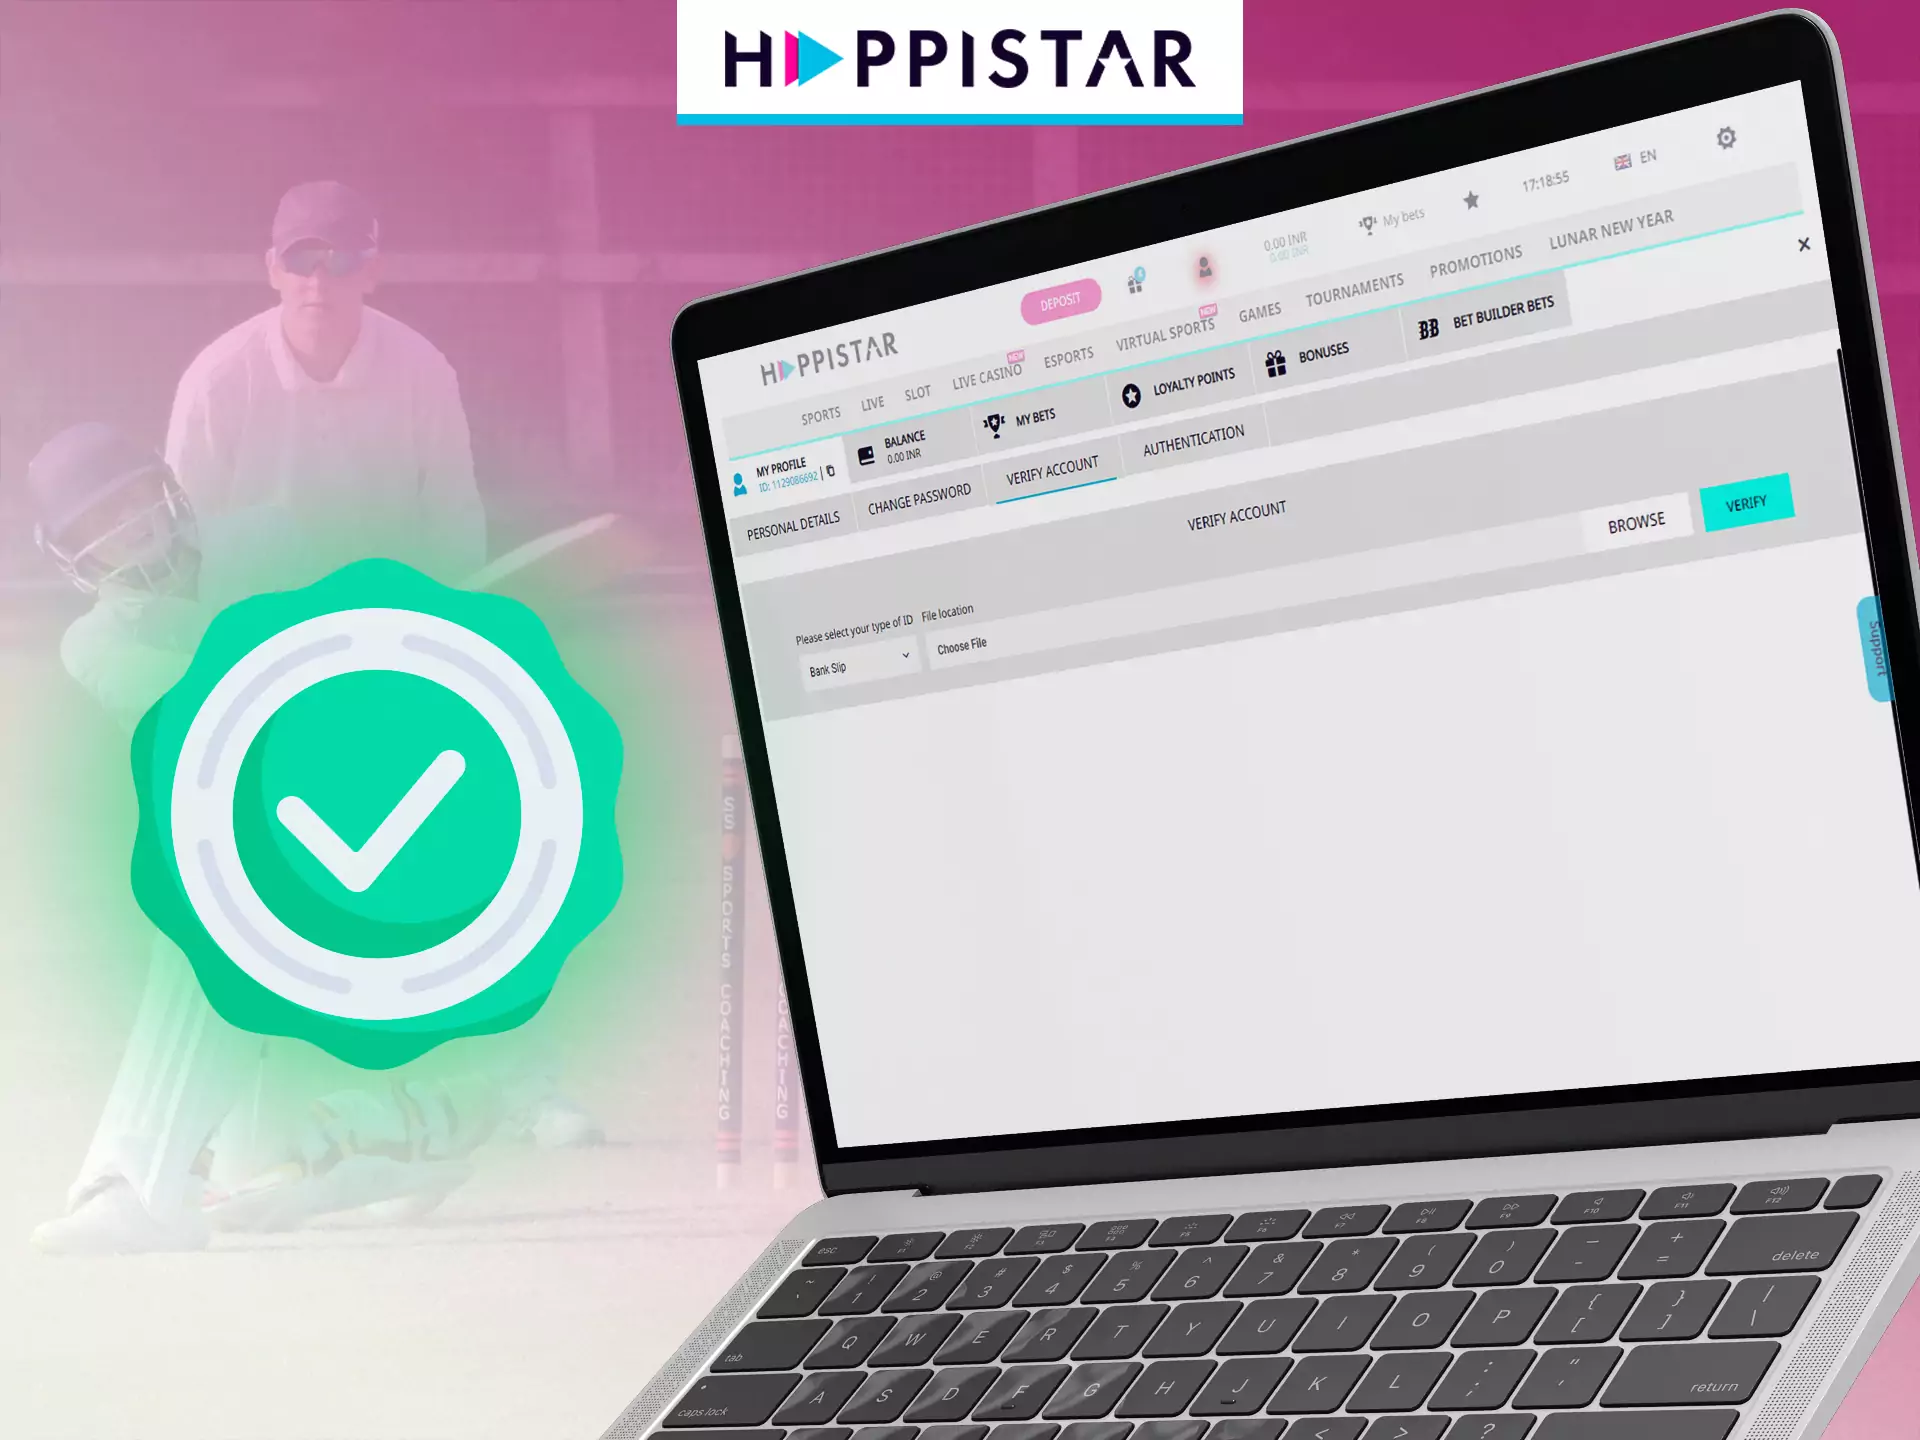 You must verify your account on Happistar.